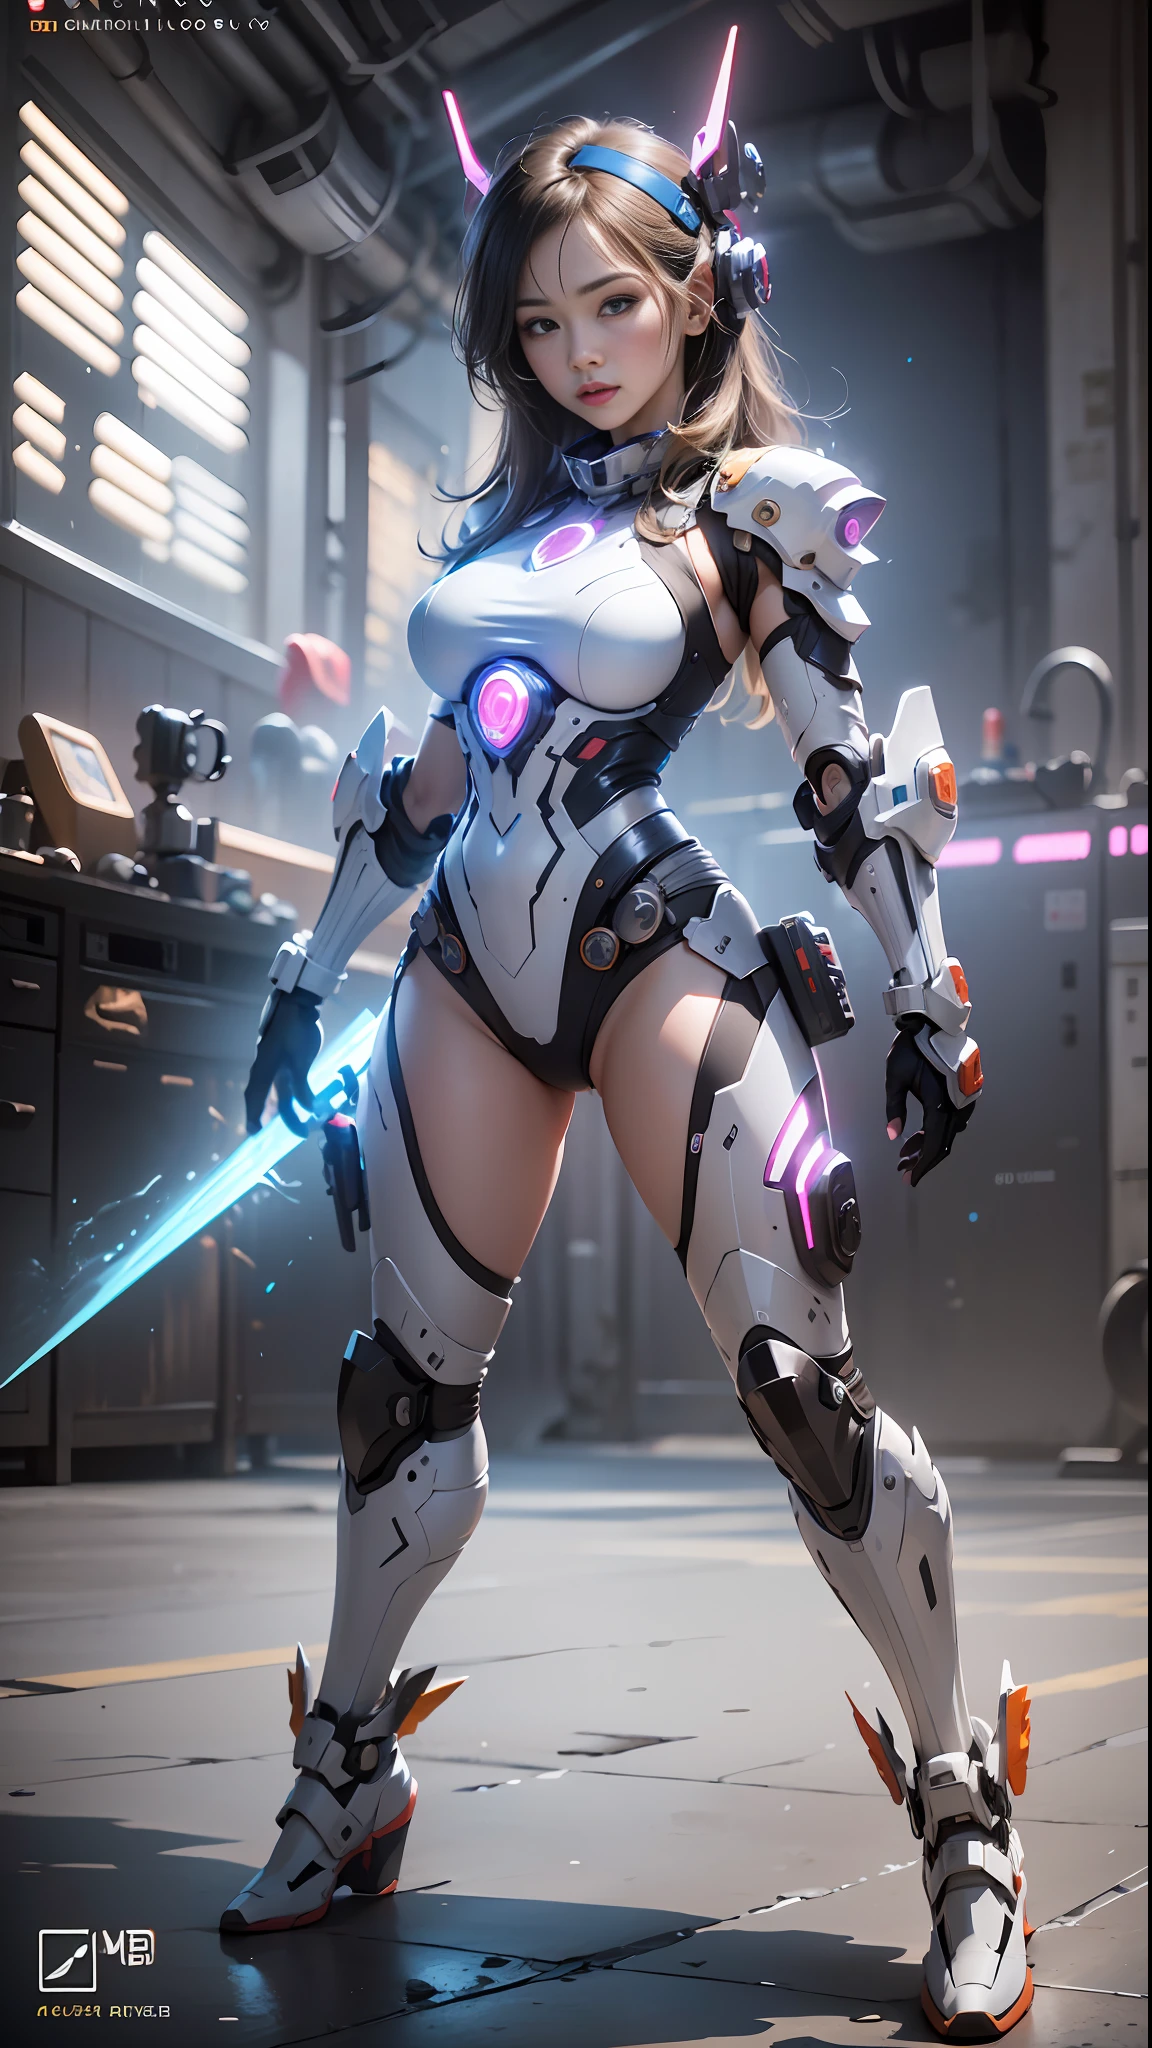 （（Best quality））， （（nmasterpiece））， （intensely detailed： 1.3）， 3d，galactic cybernetic mask,Ikaruvarkyri mecha， Beautiful cyberpunk woman， Chef-style armor， Movie poster composition，Sci-fi technology， hdr（High dynamic range）， raytraced， nvidia RTX， hyper resolution， illusory 5， sub-surface Scattering， PBR textures， Post-processing， Anisotropic filtration， deep of field， Maximum sharpness and acutance， multi-layer texture， Specular and albedo maps， Surface Coloring， Accurate simulation of light-material interactions， perfectly proportioned，octane rendered，duotone lighting，Low ISO，White balance，trichotomy，Large aperture，8K raw data，high efficiency subpixels，sub-pixel convolution，light particules，Light scattering，tyndalleffect，Very sexy，A full body，Fighting posture，